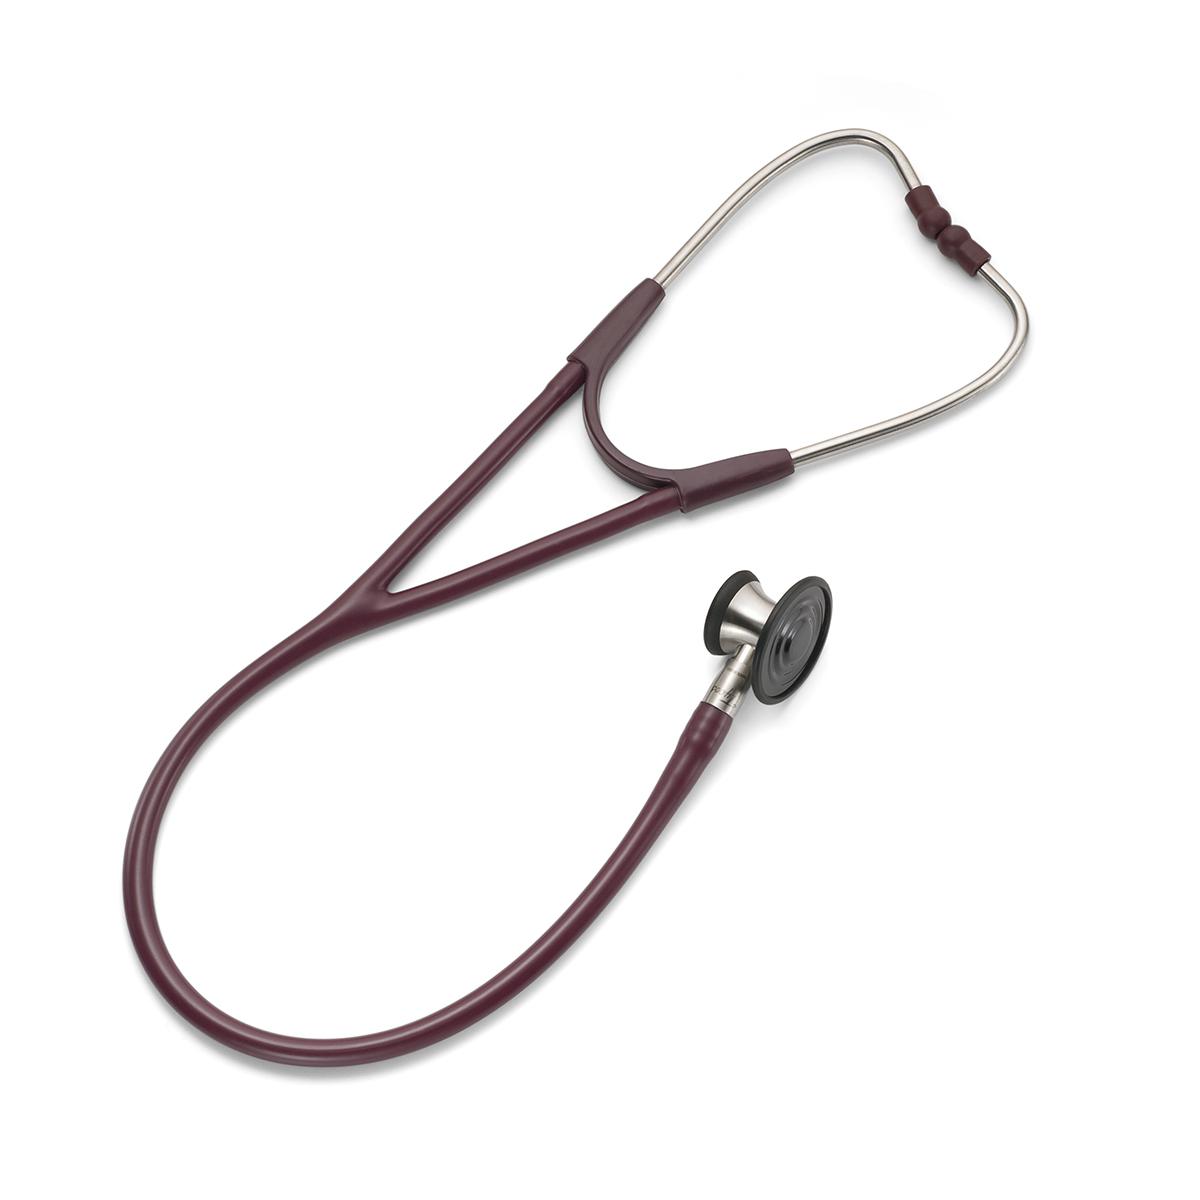 The Welch Allyn Harvey Elite Stethoscope: Veterinary with its double head in profile, highlighting its bell and flat sides.